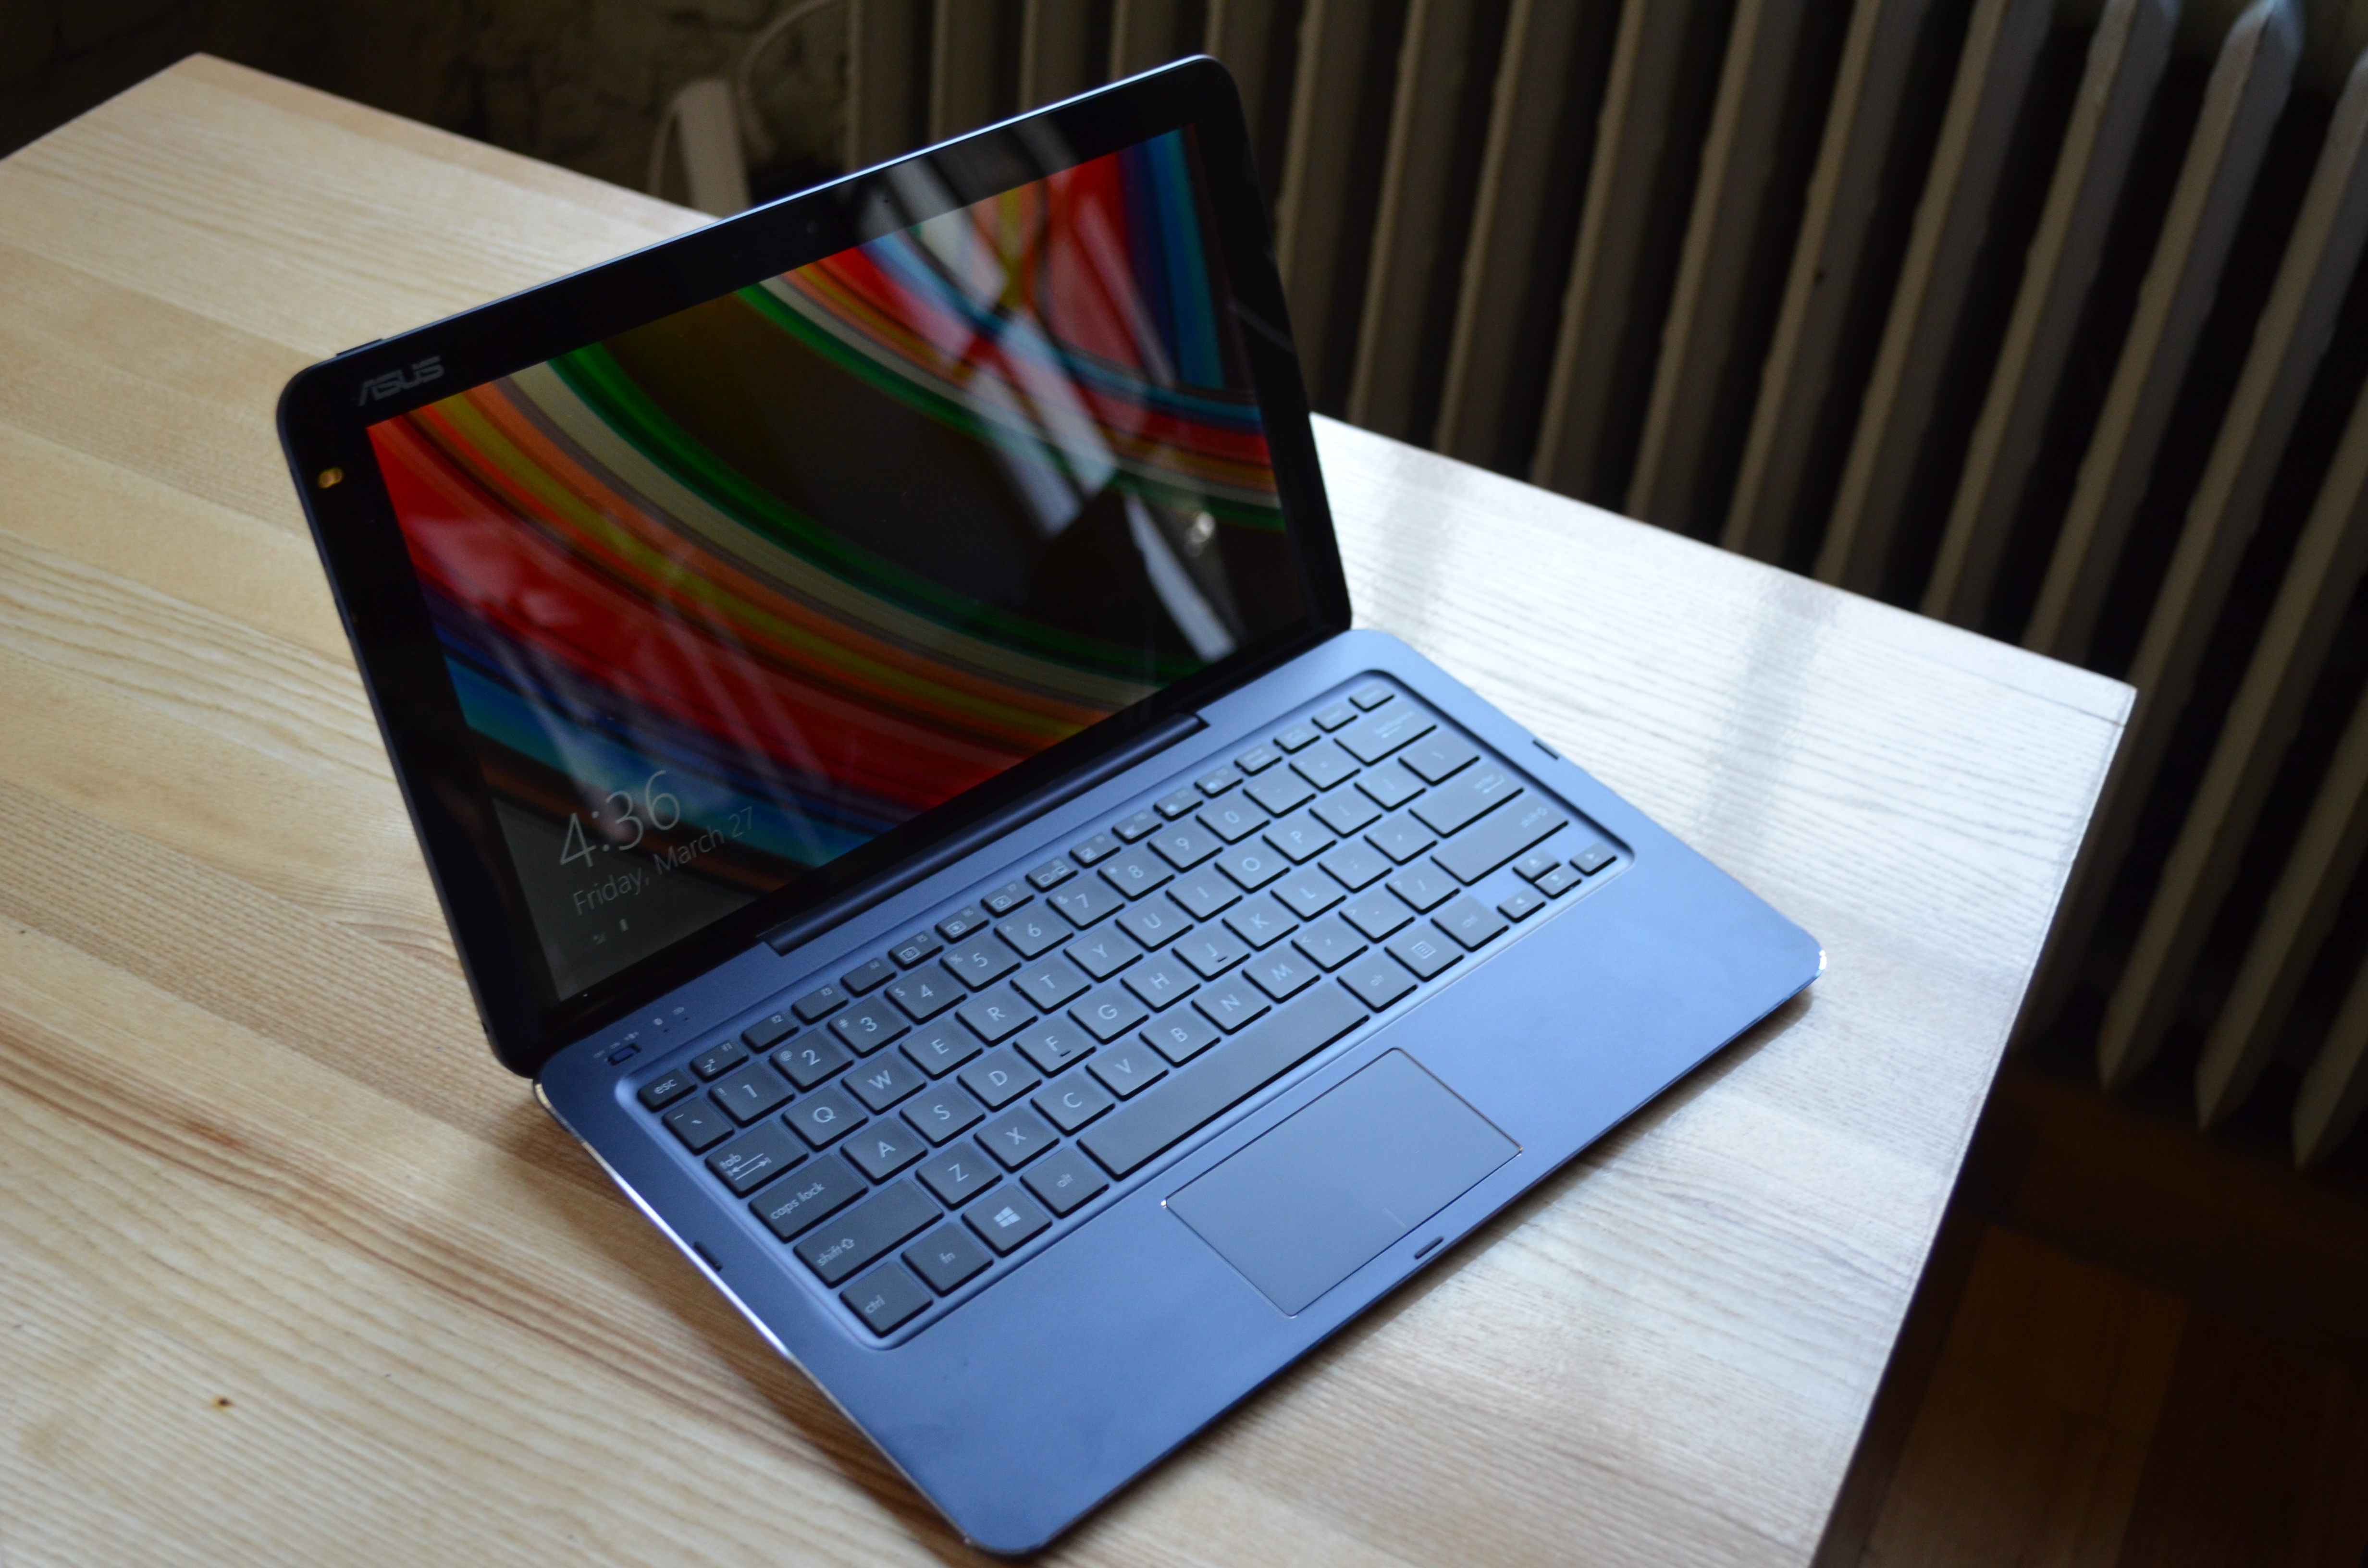 The 12.5-inch Asus Transformer Book T300 Chi Now Available for a $699 Price  Tag - Tablet News